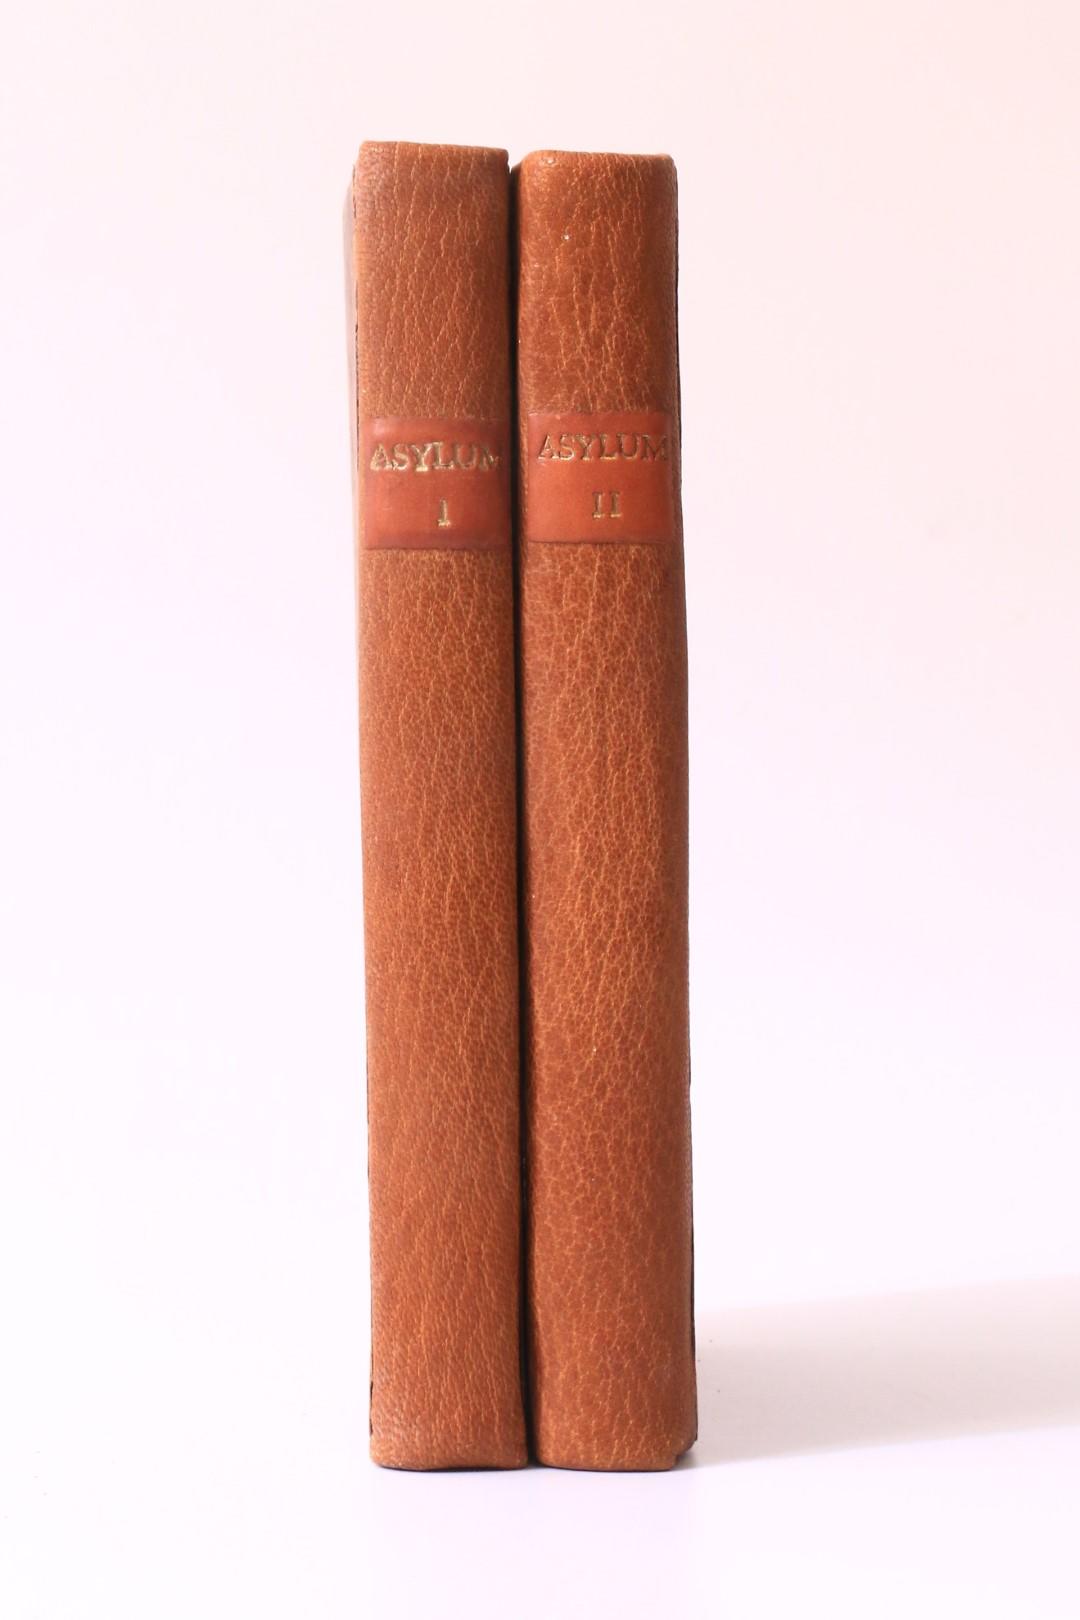 I[saac] Mitchell - The Asylum; or Alonzo and Melissa. An American Tale Founded on Fact - Joseph Nelson, 1811, First Edition.